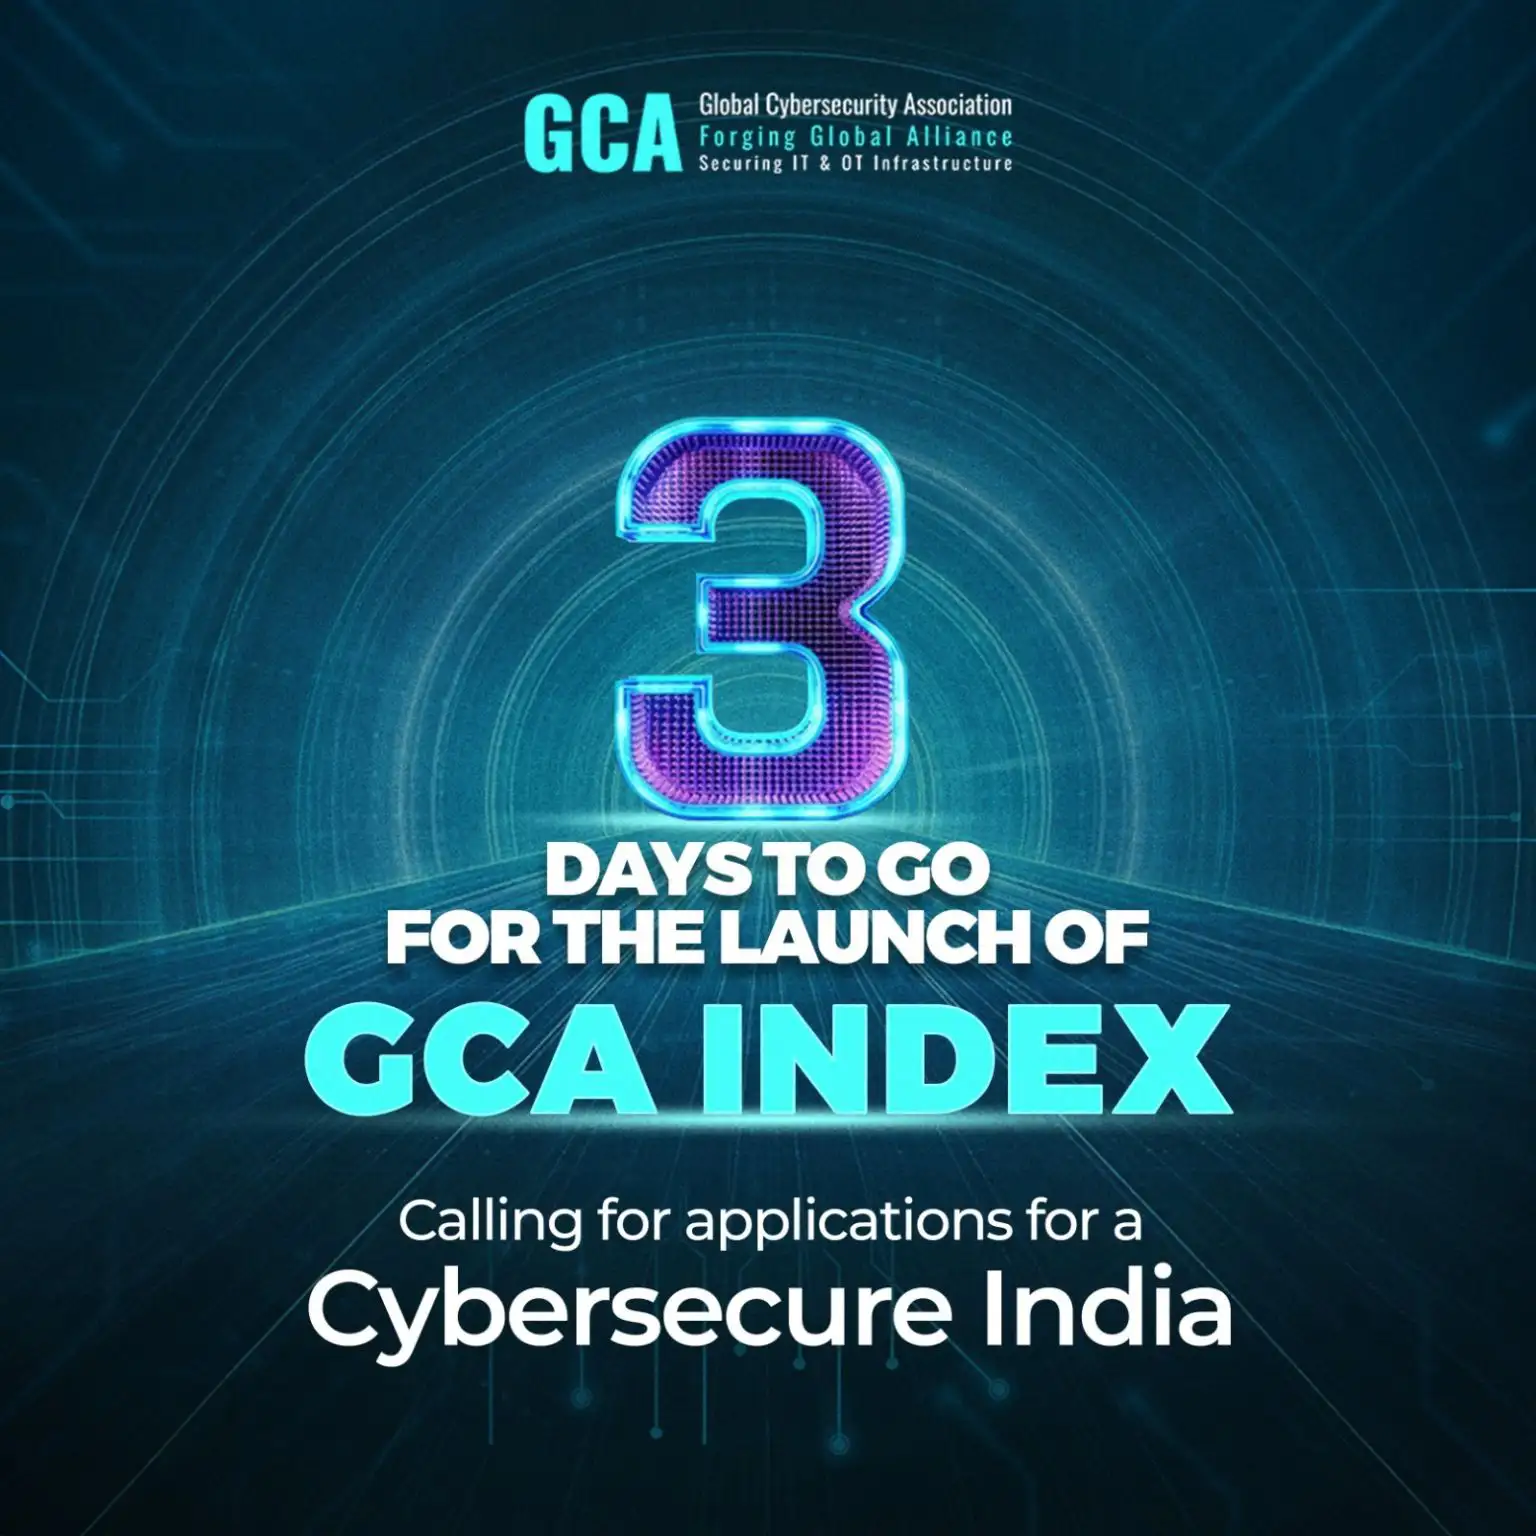 3 days to go! Join us on the mission to make India cybersecure.